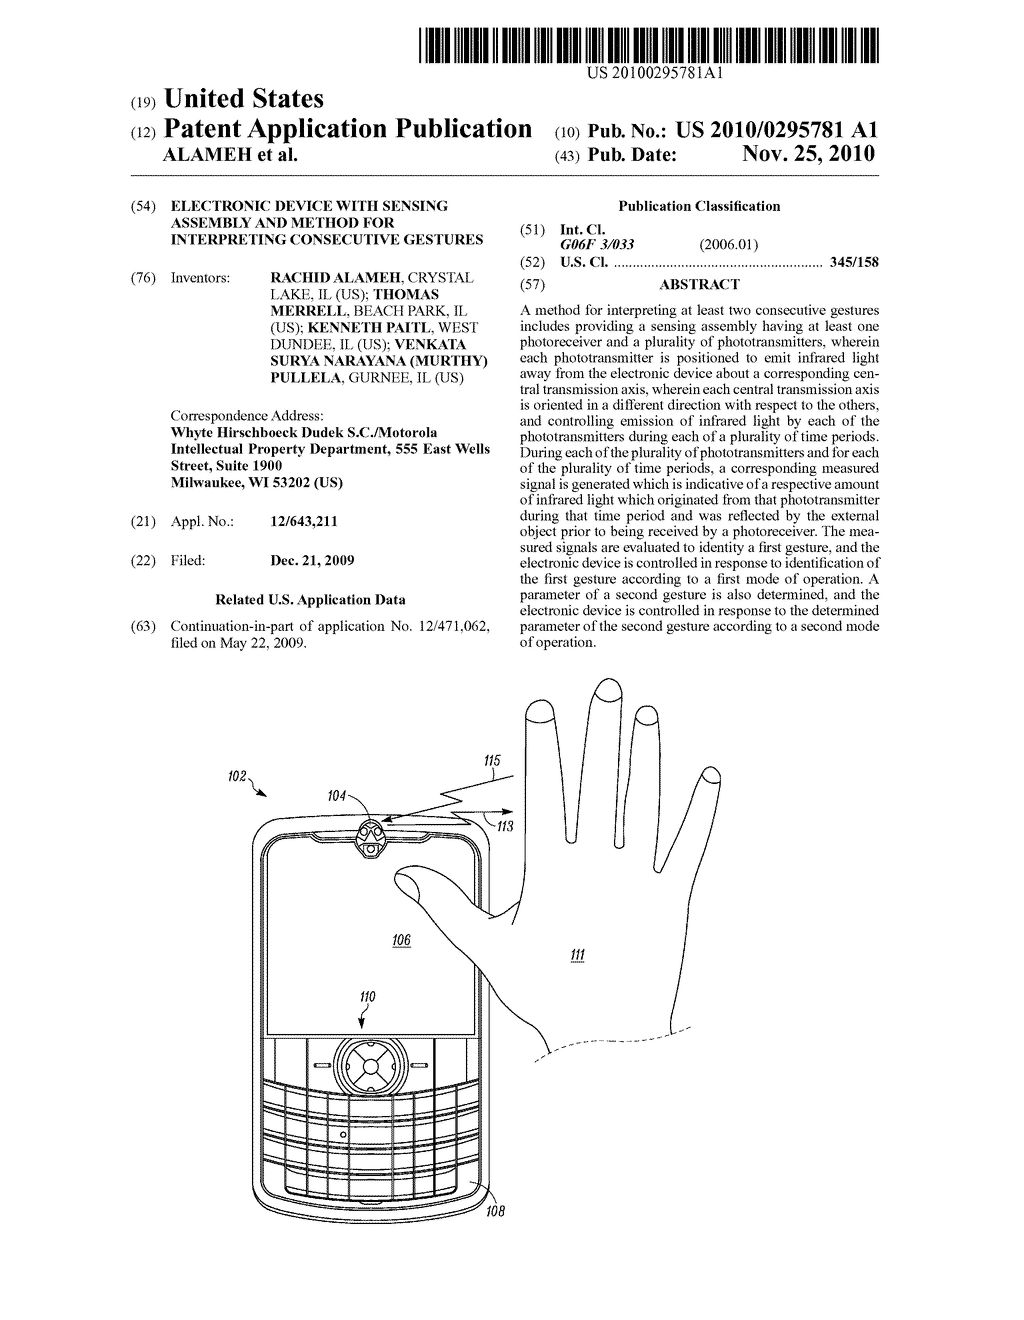 Electronic Device with Sensing Assembly and Method for Interpreting Consecutive Gestures - diagram, schematic, and image 01